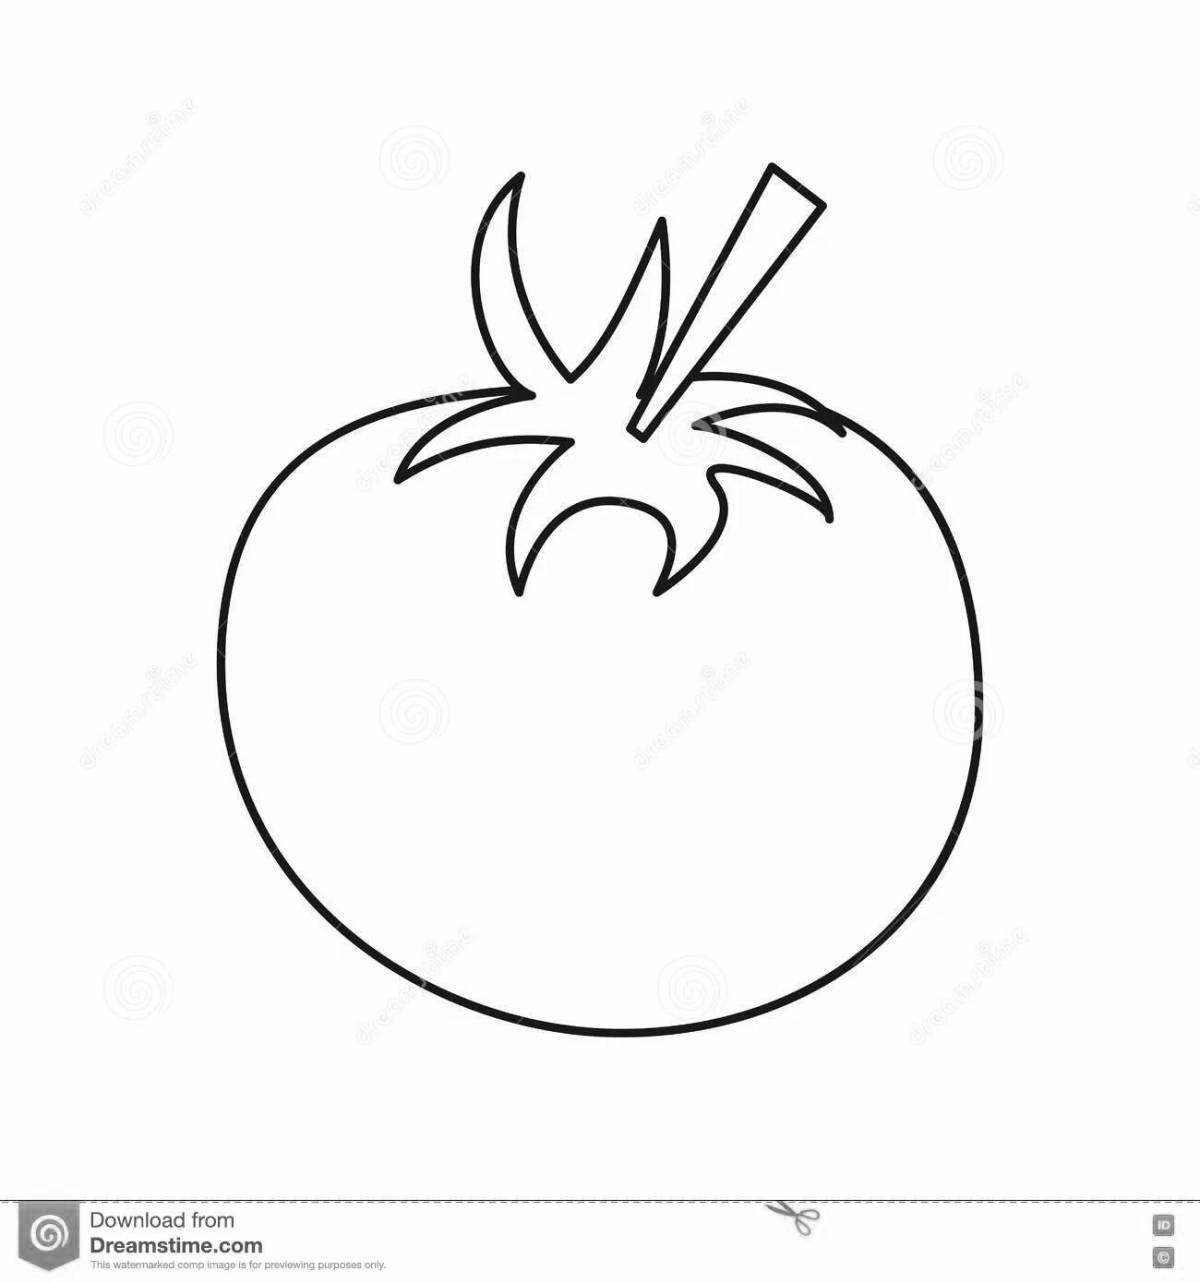 Playful tomato coloring page for 2-3 year olds